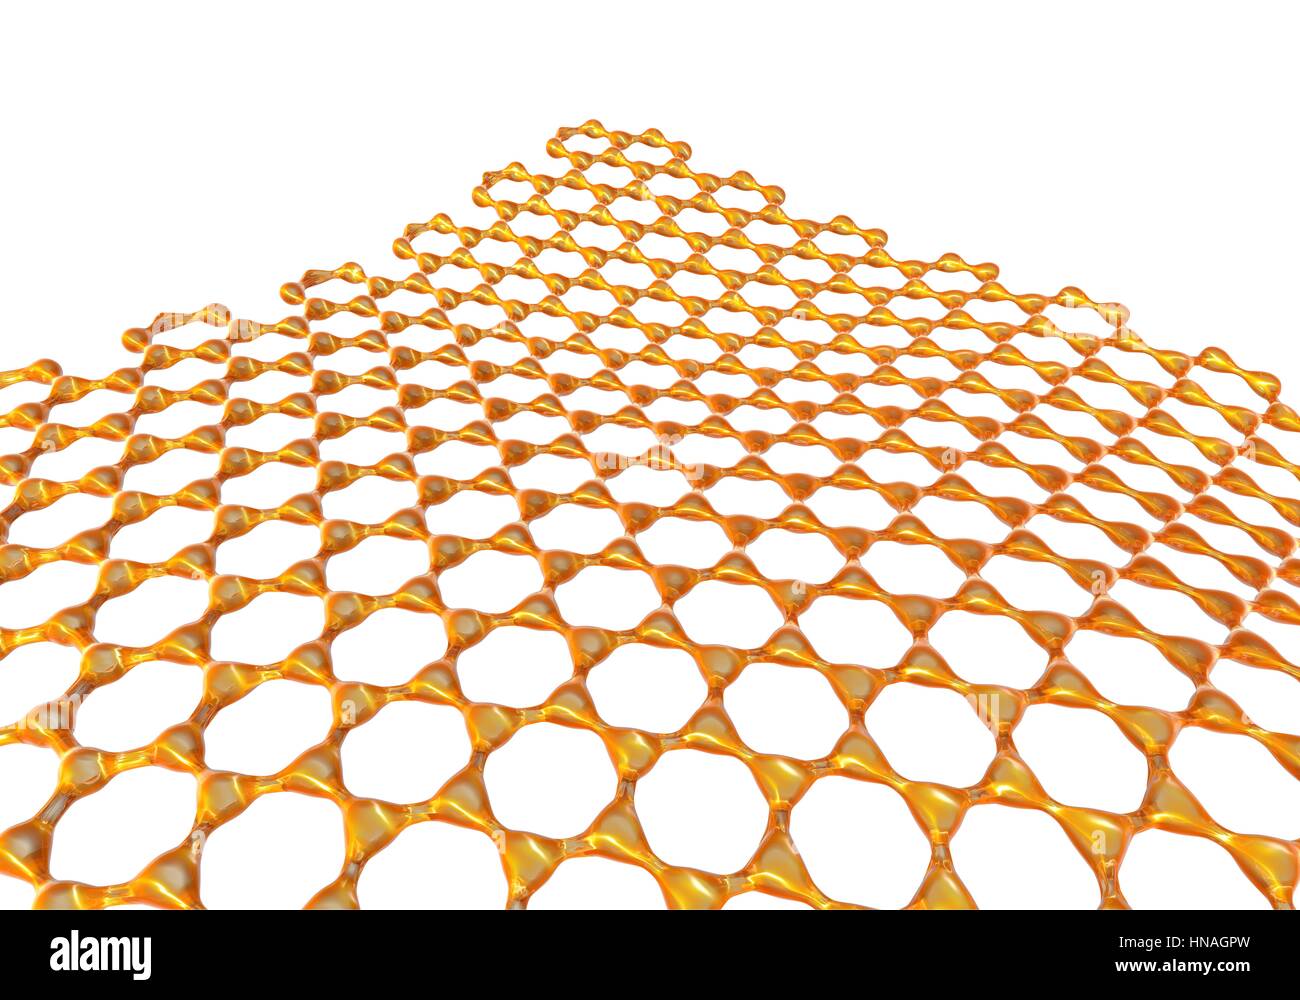 Graphene sheet. Illustration of the atomic-scale molecular structure of graphene, a single layer of graphite. It is composed of hexagonally arranged carbon atoms linked by strong covalent bonds. Graphene is very strong and flexible. It transports electrons highly efficiently and may one day replace silicon in computer chips and other technology applications. Stock Photo